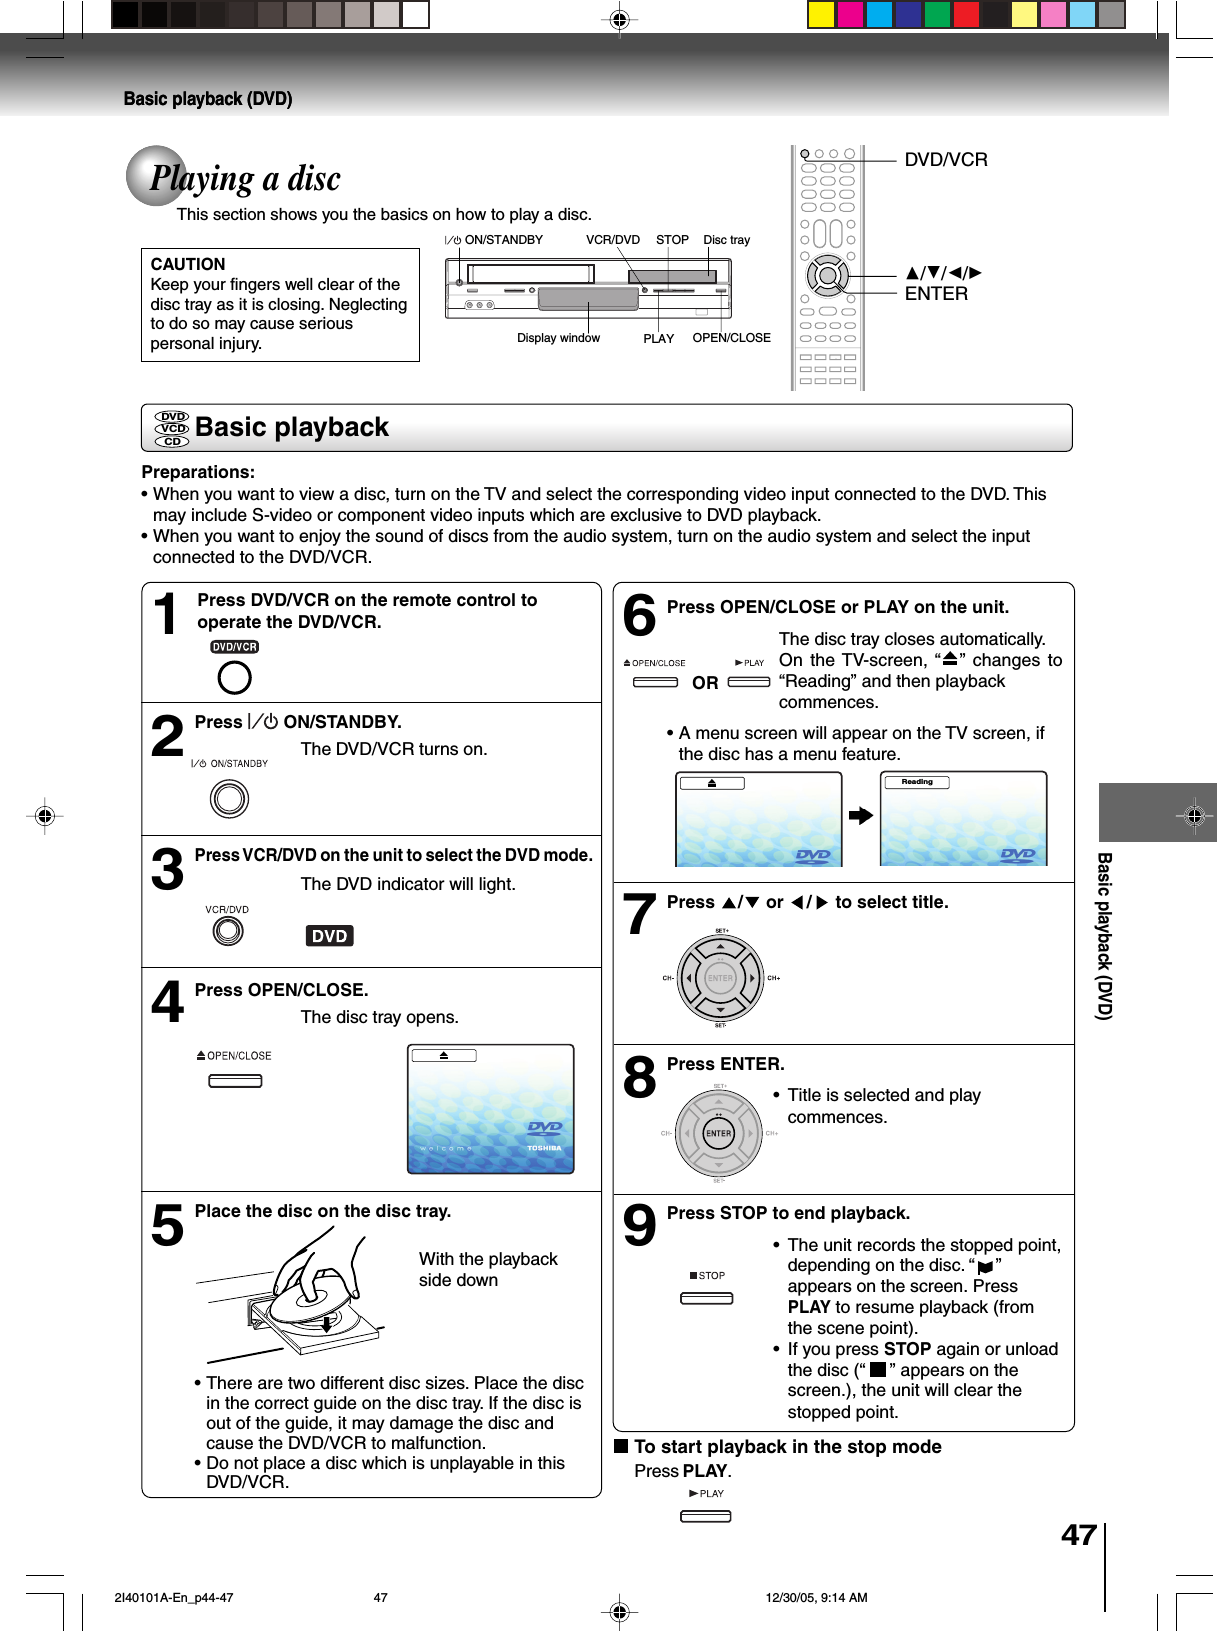 47Basic playback (DVD)Basic playback (DVD)CAUTIONKeep your fingers well clear of thedisc tray as it is closing. Neglectingto do so may cause seriouspersonal injury.Basic playbackPlaying a discThis section shows you the basics on how to play a disc.Basic playback (DVD)Preparations:•When you want to view a disc, turn on the TV and select the corresponding video input connected to the DVD. Thismay include S-video or component video inputs which are exclusive to DVD playback.•When you want to enjoy the sound of discs from the audio system, turn on the audio system and select the inputconnected to the DVD/VCR.DVDVCDCDPress OPEN/CLOSE or PLAY on the unit.The disc tray closes automatically.On the TV-screen, “ ”  changes to“Reading” and then playbackcommences.•A menu screen will appear on the TV screen, ifthe disc has a menu feature.Press  /  or  / to select title.Press ENTER.•Title is selected and playcommences.Press STOP to end playback.•The unit records the stopped point,depending on the disc. “ ”appears on the screen. PressPLAY to resume playback (fromthe scene point).•If you press STOP again or unloadthe disc (“   ” appears on thescreen.), the unit will clear thestopped point.Press   ON/STANDBY.The DVD/VCR turns on.Press VCR/DVD on the unit to select the DVD mode.The DVD indicator will light.Press OPEN/CLOSE.The disc tray opens.Place the disc on the disc tray.With the playbackside down•There are two different disc sizes. Place the discin the correct guide on the disc tray. If the disc isout of the guide, it may damage the disc andcause the DVD/VCR to malfunction.•Do not place a disc which is unplayable in thisDVD/VCR.24563789To start playback in the stop modePress PLAY.OR1Press DVD/VCR on the remote control tooperate the DVD/VCR.C/D/B/AENTERDVD/VCRDisplay window OPEN/CLOSESTOP Disc trayVCR/DVDPLAYON/STANDBYReading 2I40101A-En_p44-47 12/30/05, 9:14 AM47